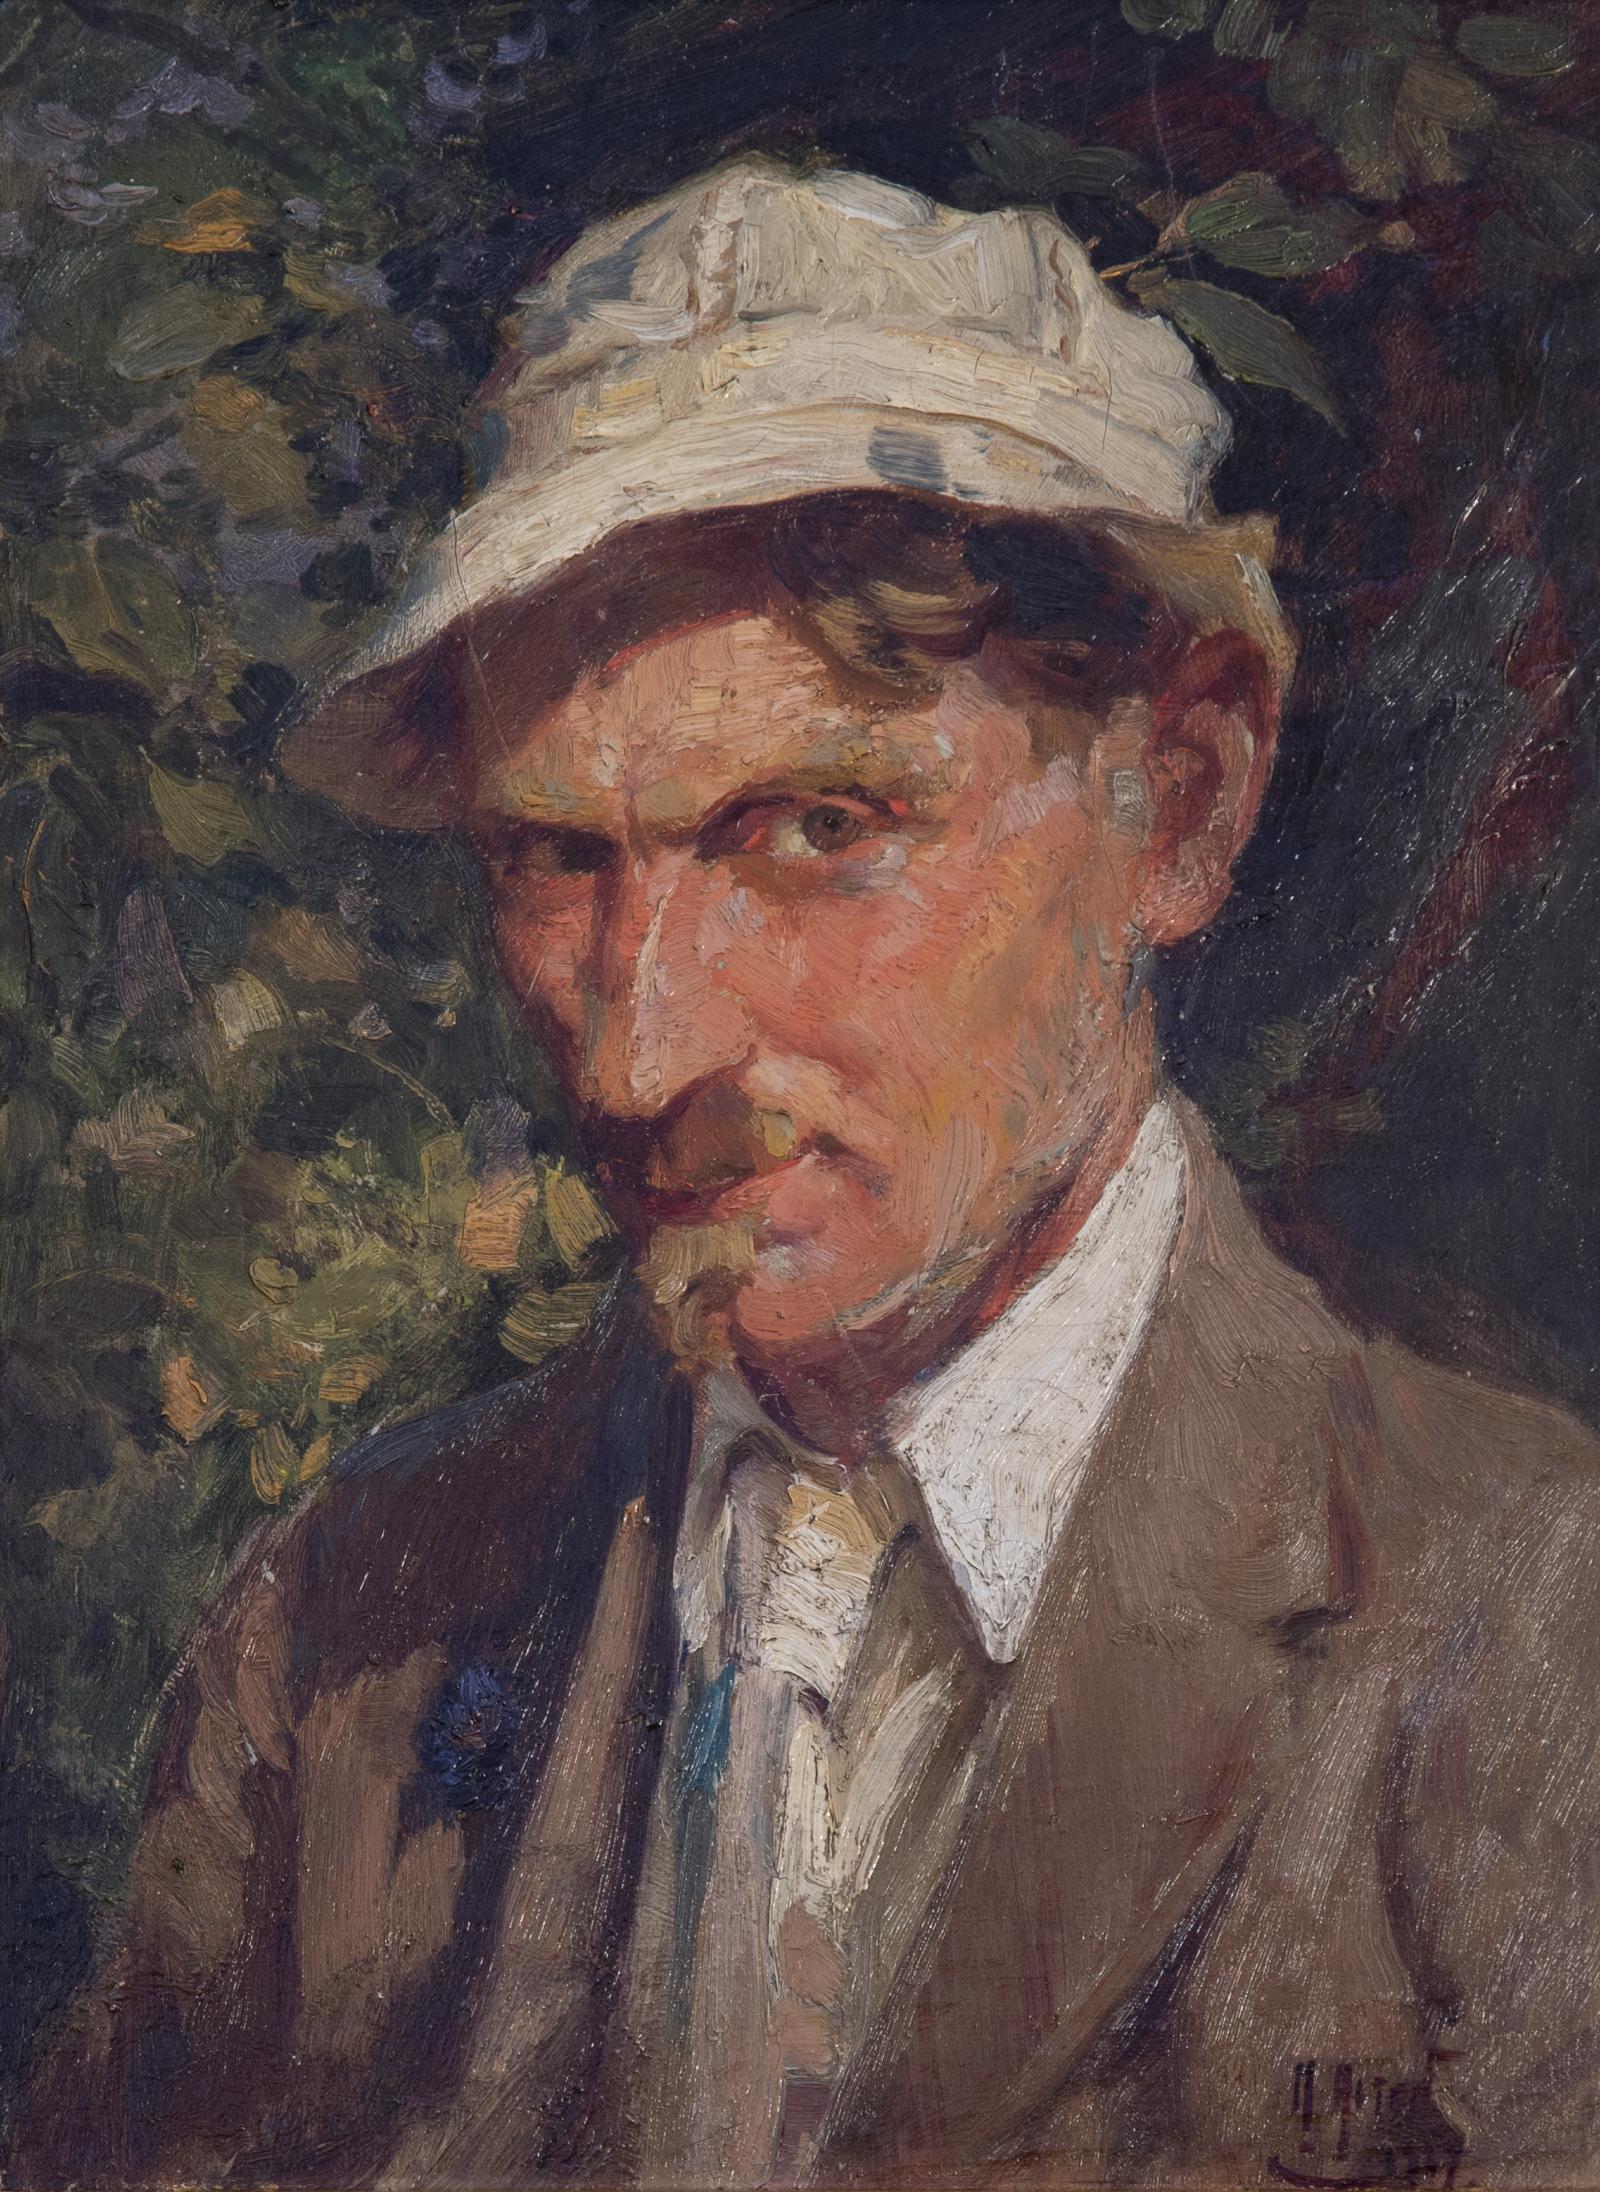 Self-portrait of a man wearing a brown jacket, tie, white shirt and white hat.